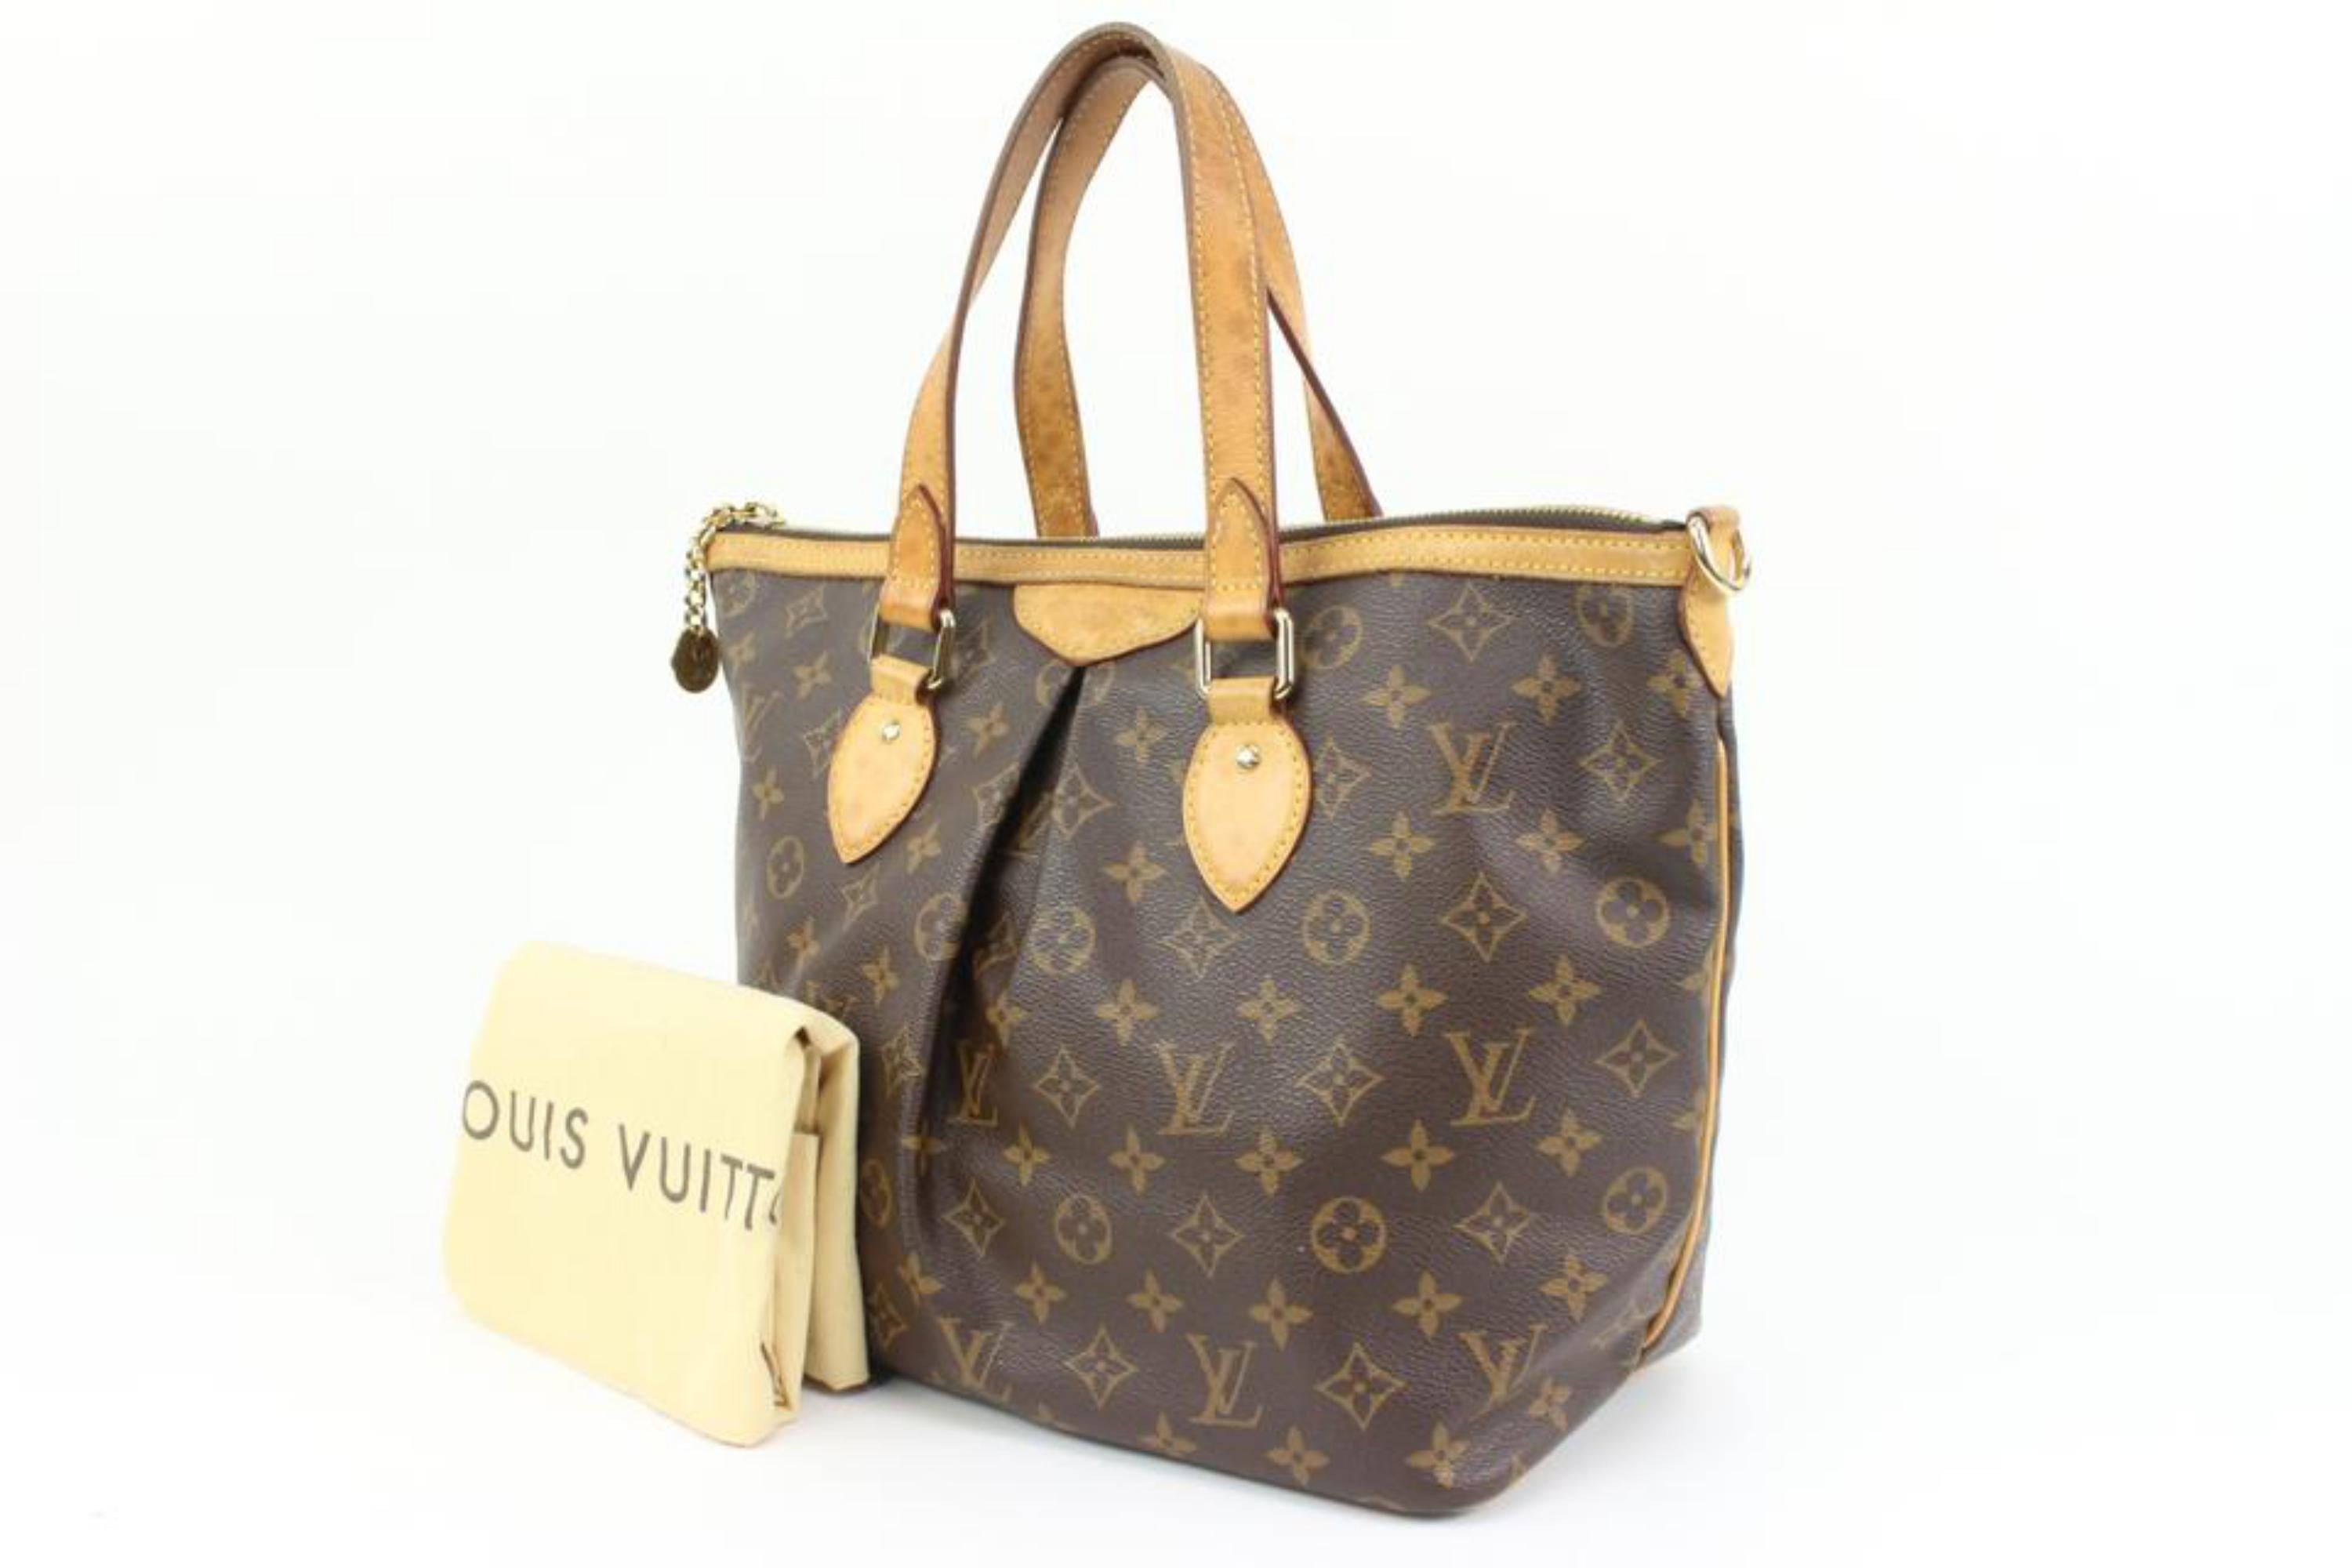 Louis Vuitton Palermo - 4 For Sale on 1stDibs  palermo louis vuitton bag, louis  vuitton palermo pm, louis vuitton palermo gm original price